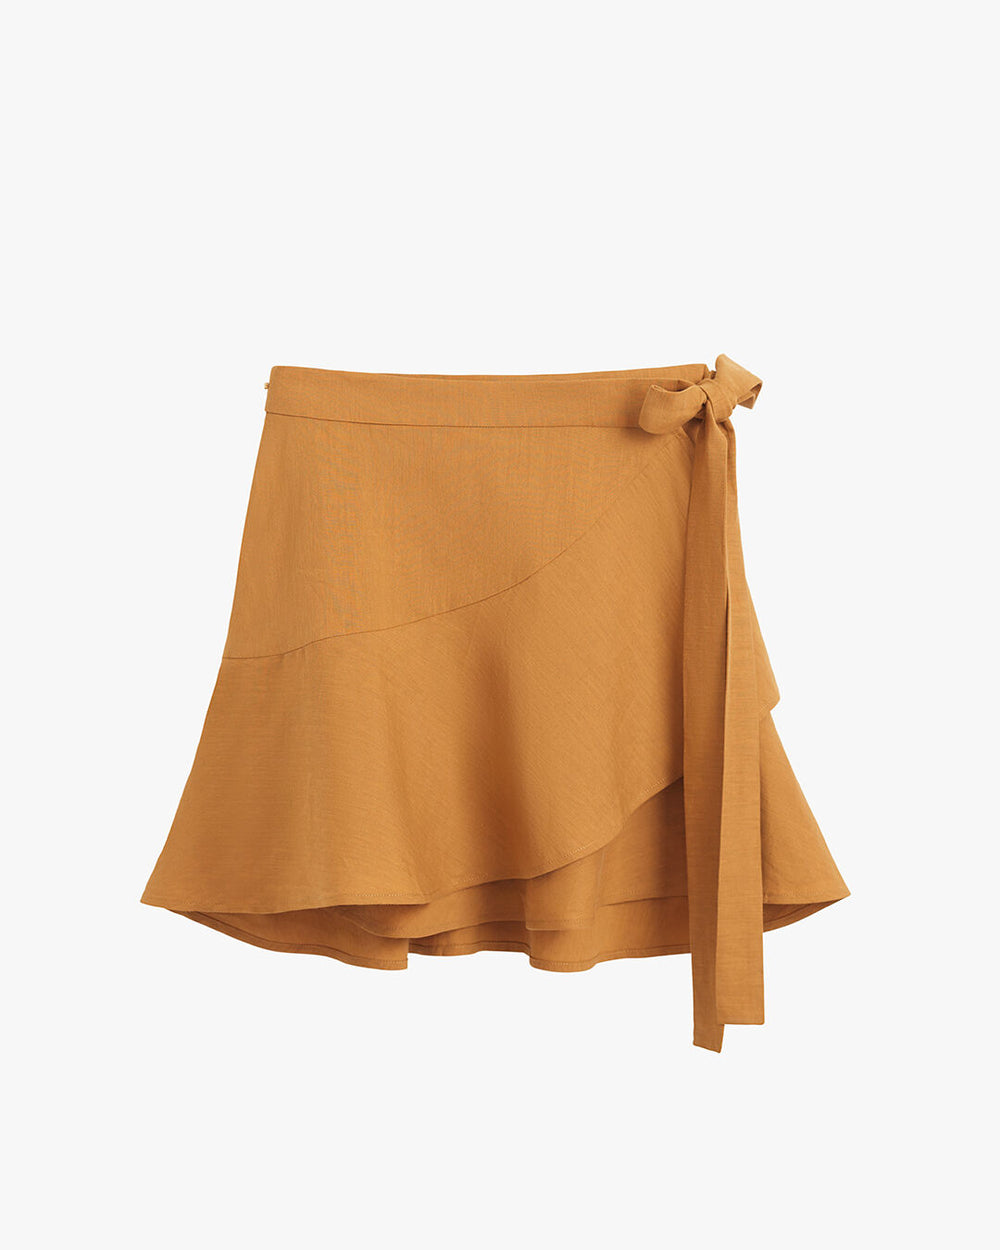 Skirt with asymmetrical hem and side tie detail.